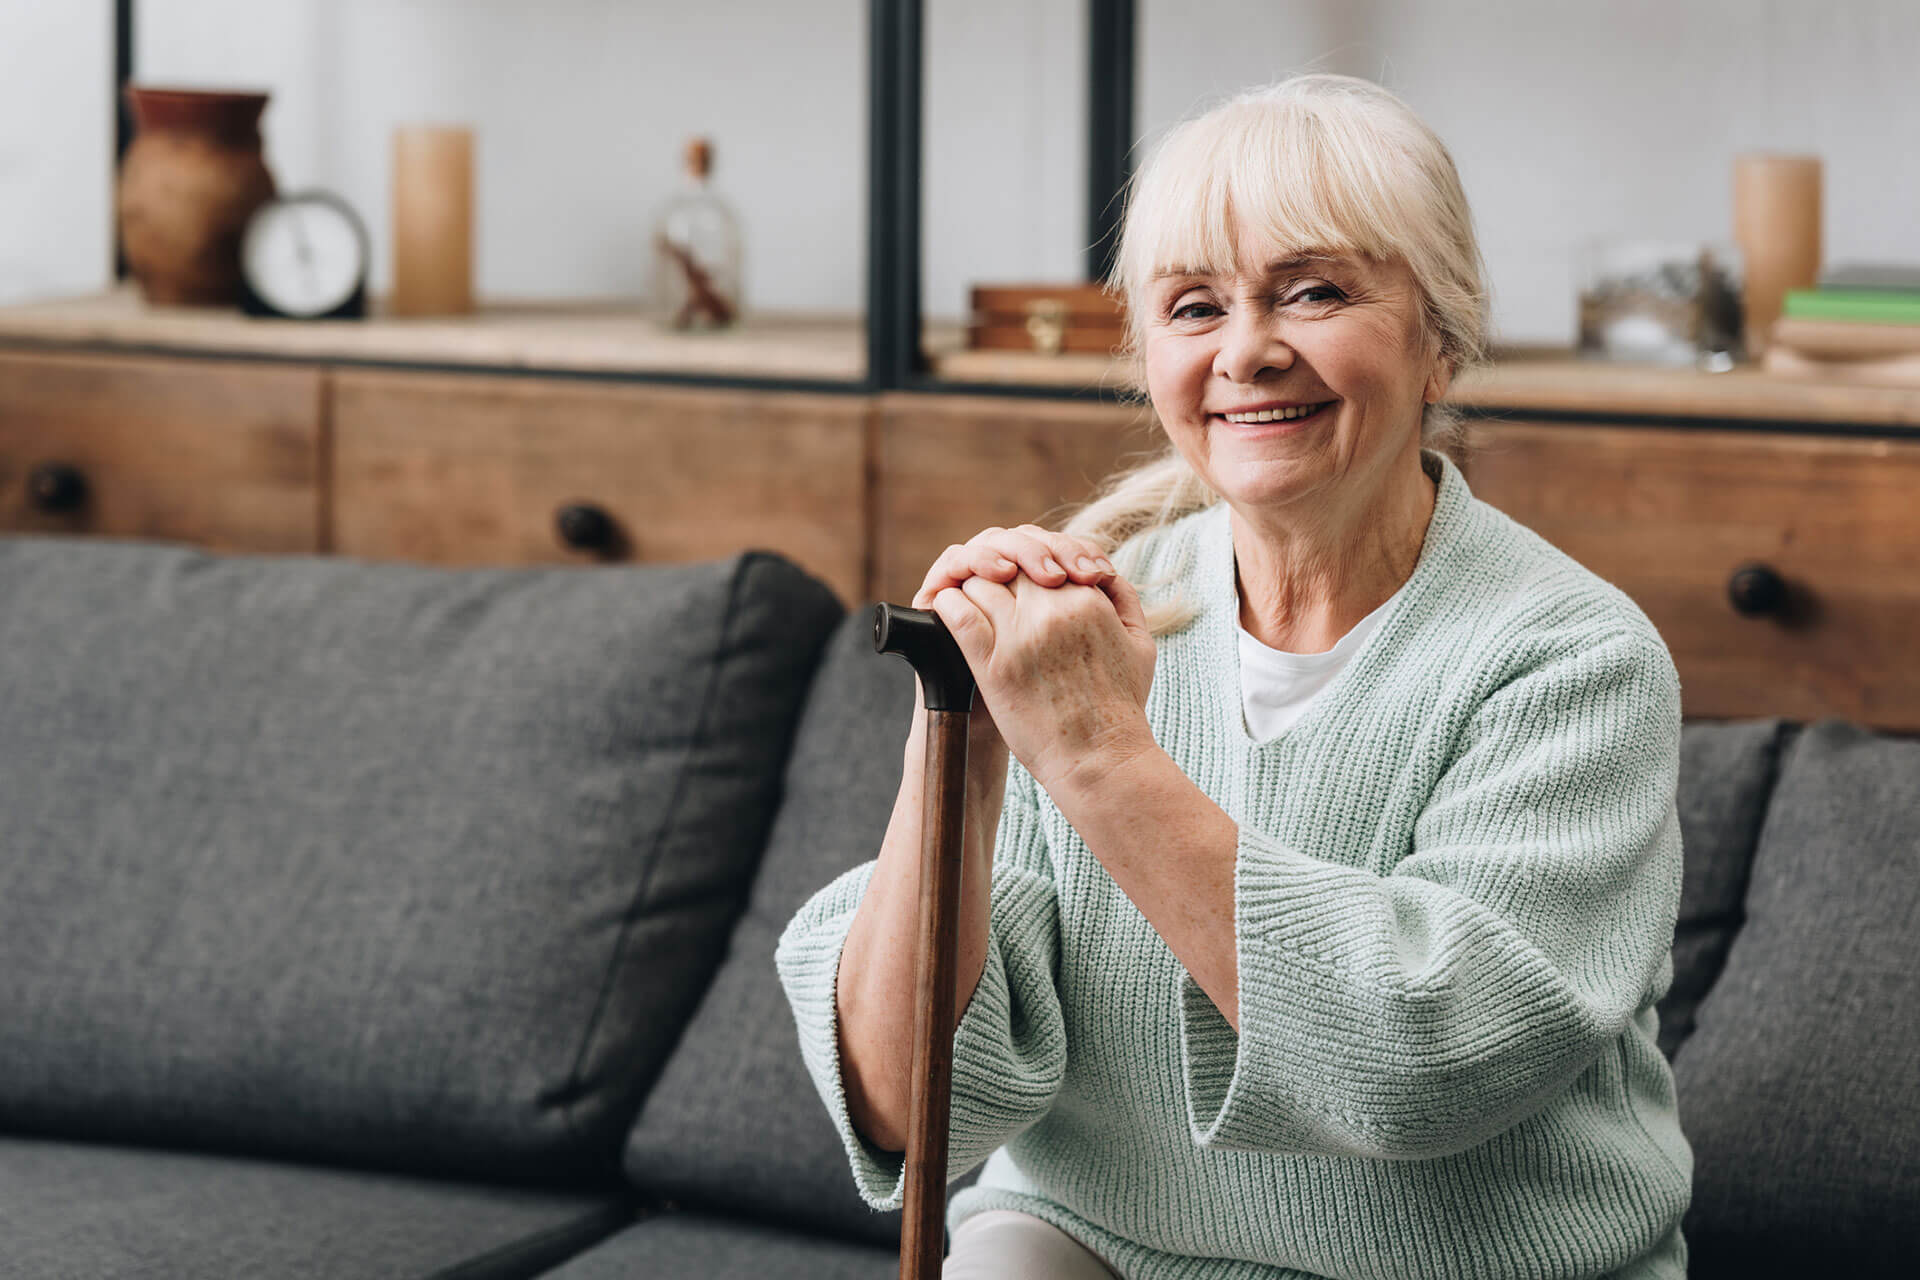 Smiling elderly woman sitting on a couch in a comfortable living space, holding a walking cane.